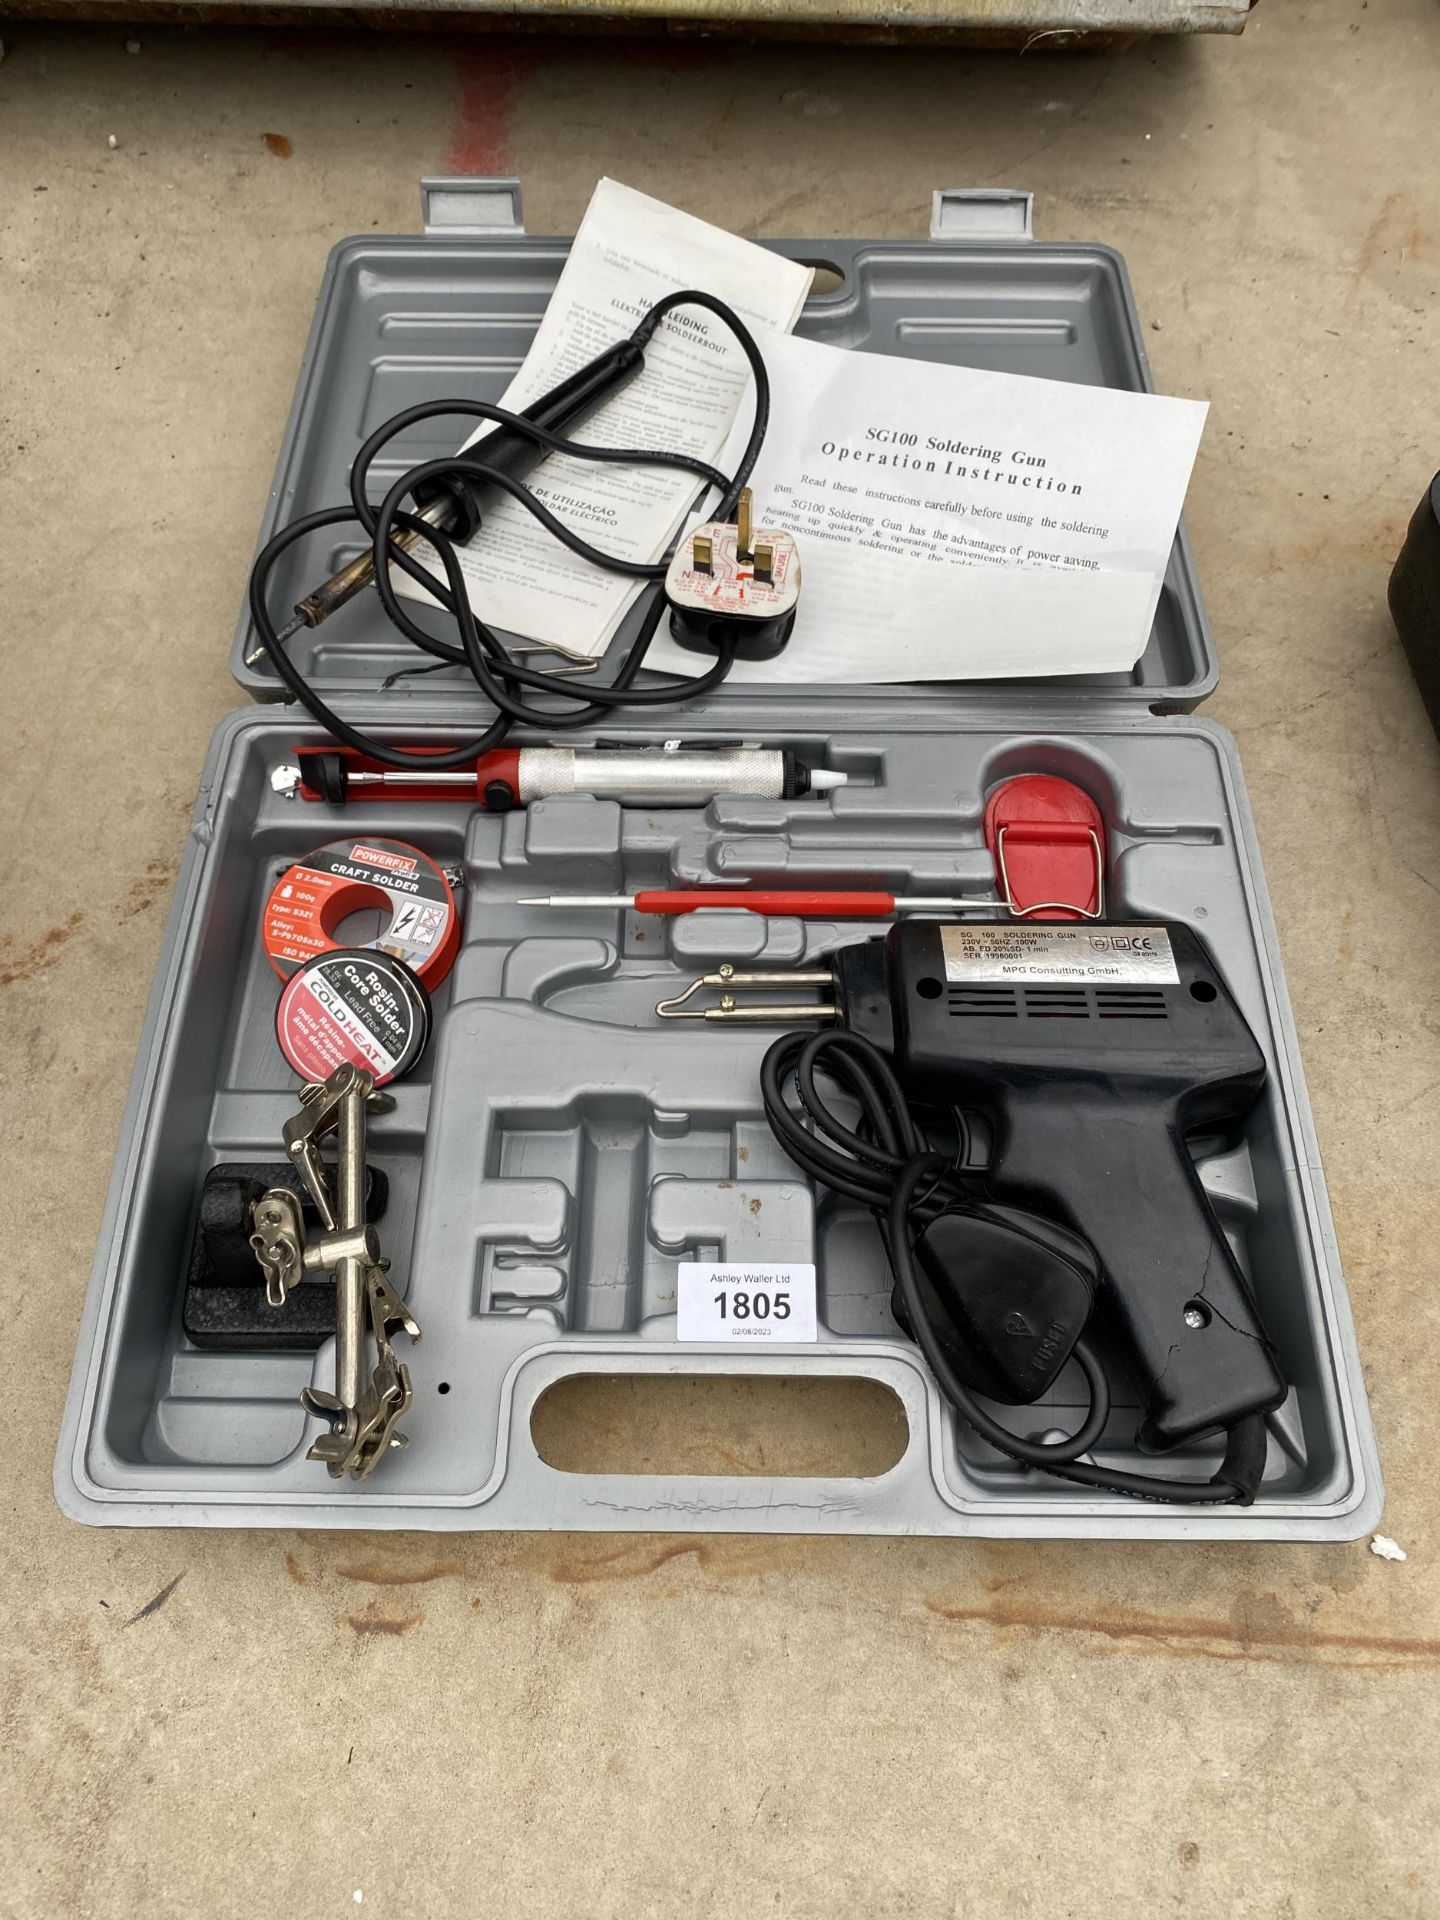 AN SG100 SOLDERING GUN WITH INSTRUCTIONS AND ATTATCHMENTS